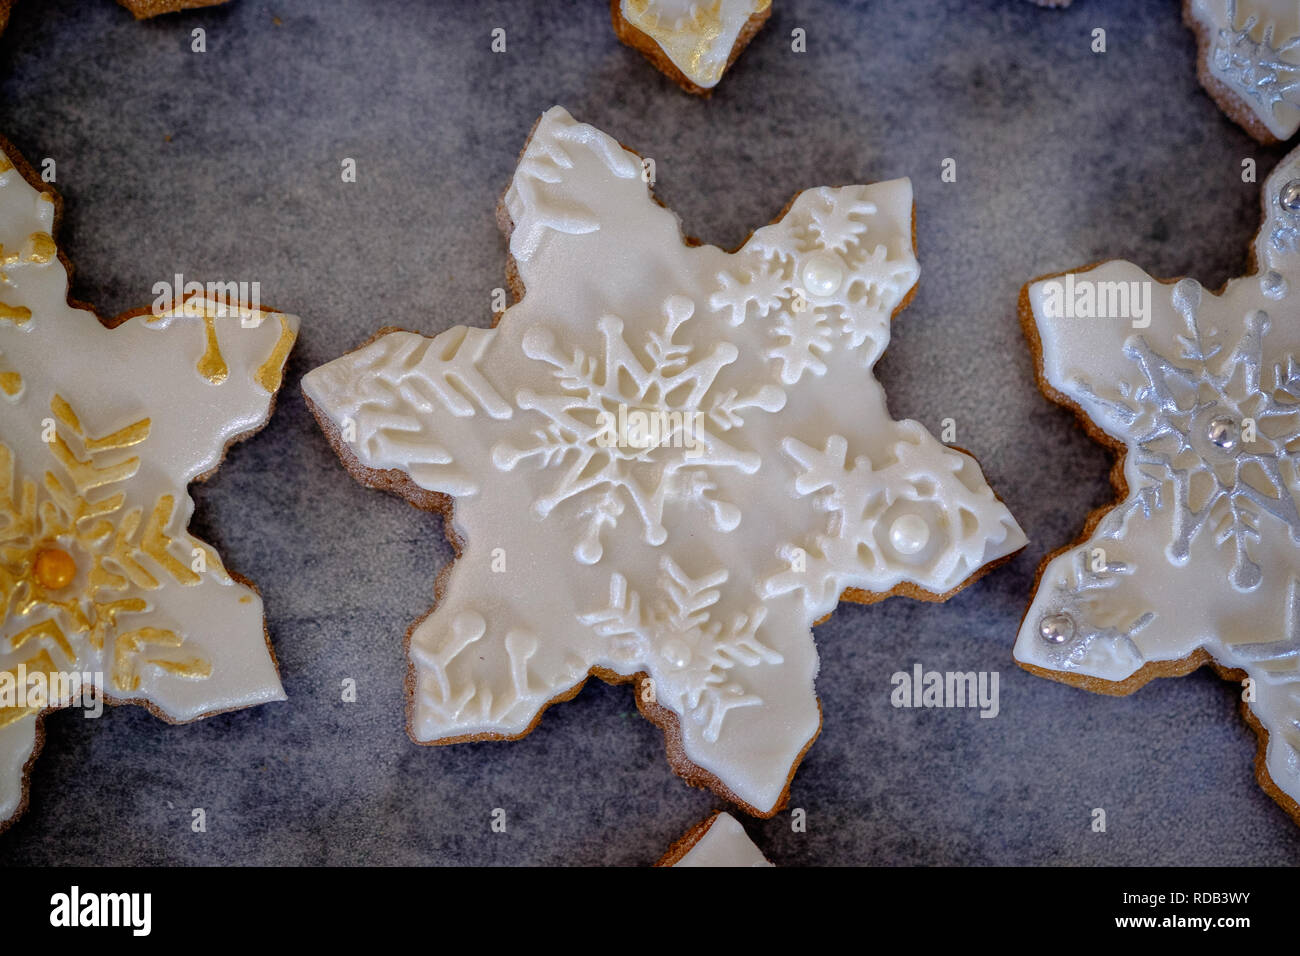 https://c8.alamy.com/comp/RDB3WY/christmas-themed-ginger-bread-snowflake-biscuits-with-decorative-embossed-fondant-icing-RDB3WY.jpg